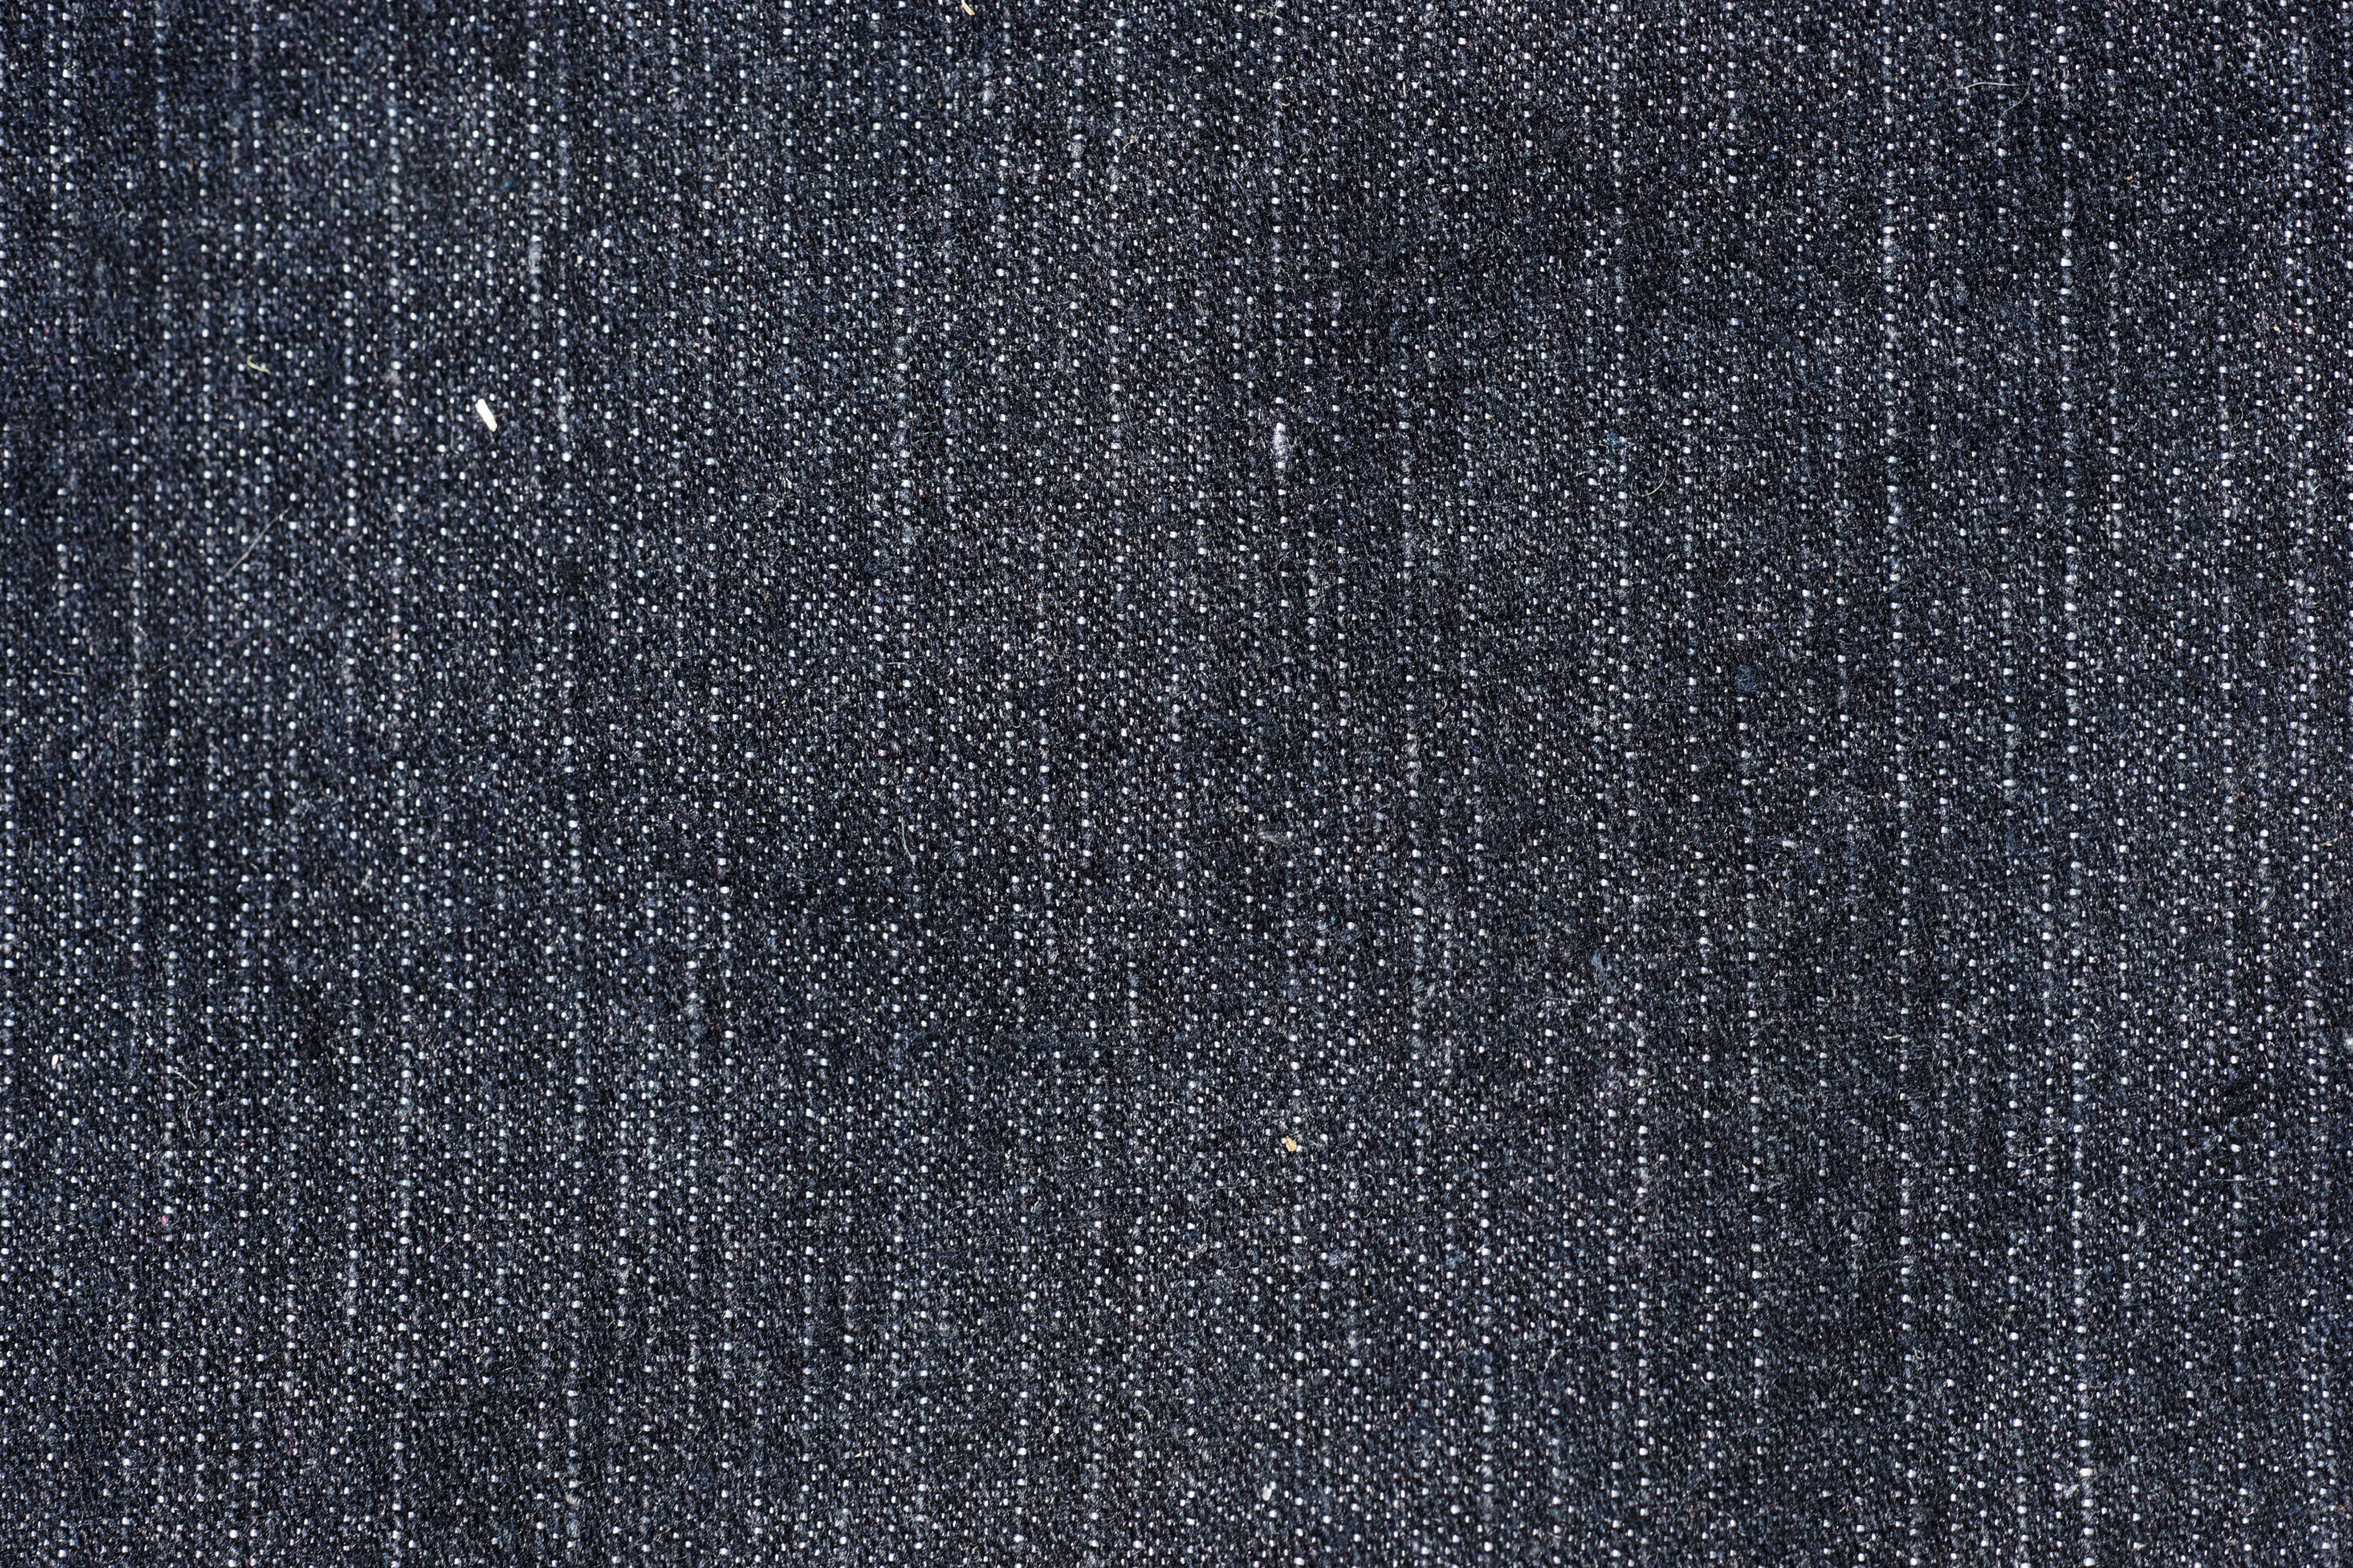 Dark Denim Texture Background Stock Photo Picture And Royalty Free Image  Image 921003